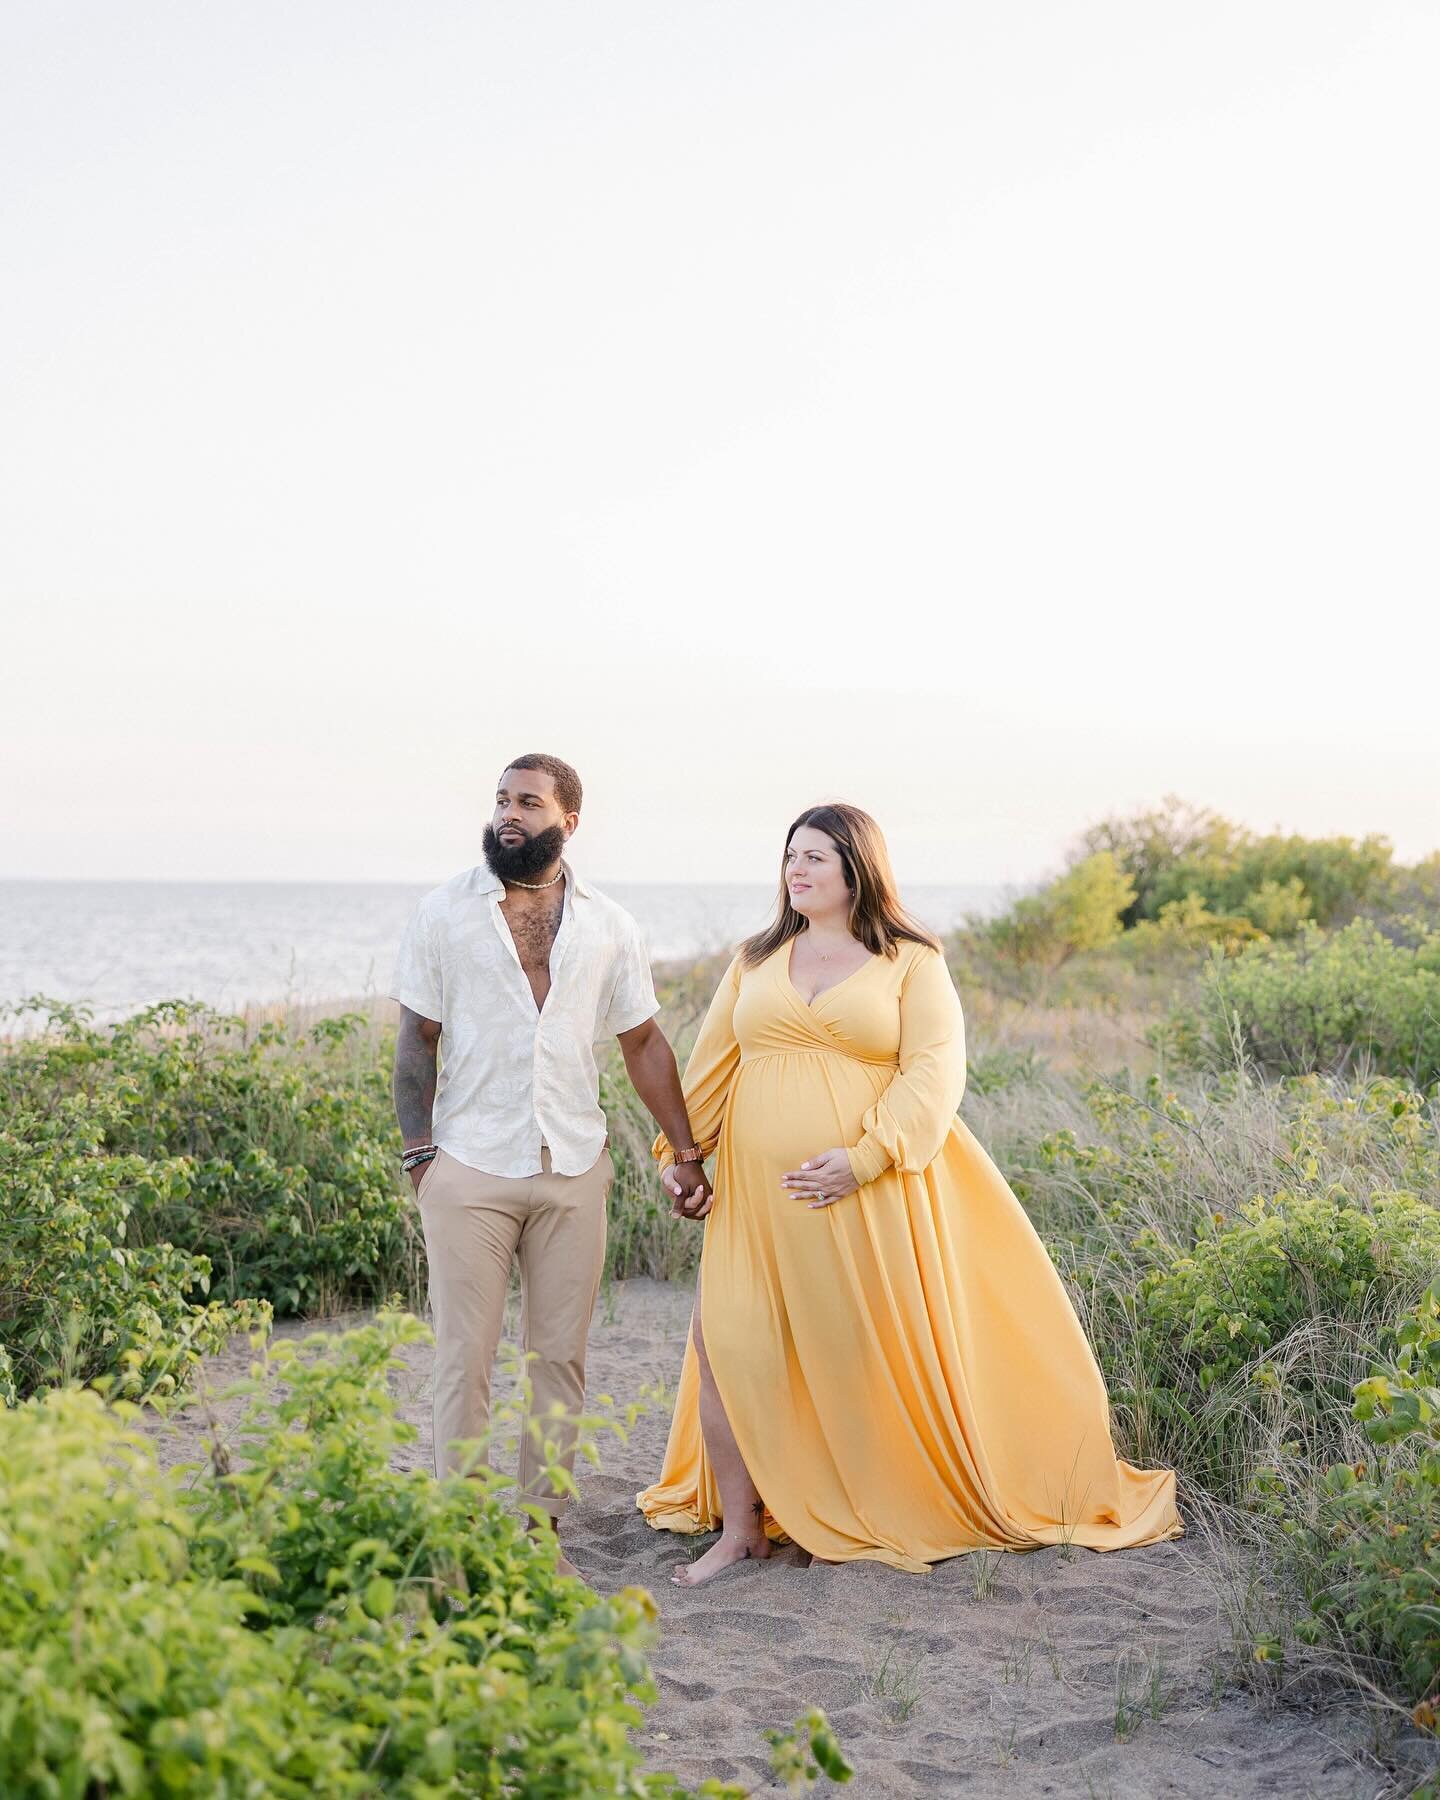 Heading in to a little bit of a maternity season 🤍 these photos are really special anytime you&rsquo;re pregnant but I especially love them when it&rsquo;s your first. 

Capturing the final moments as just husband and wife before also becoming mom a